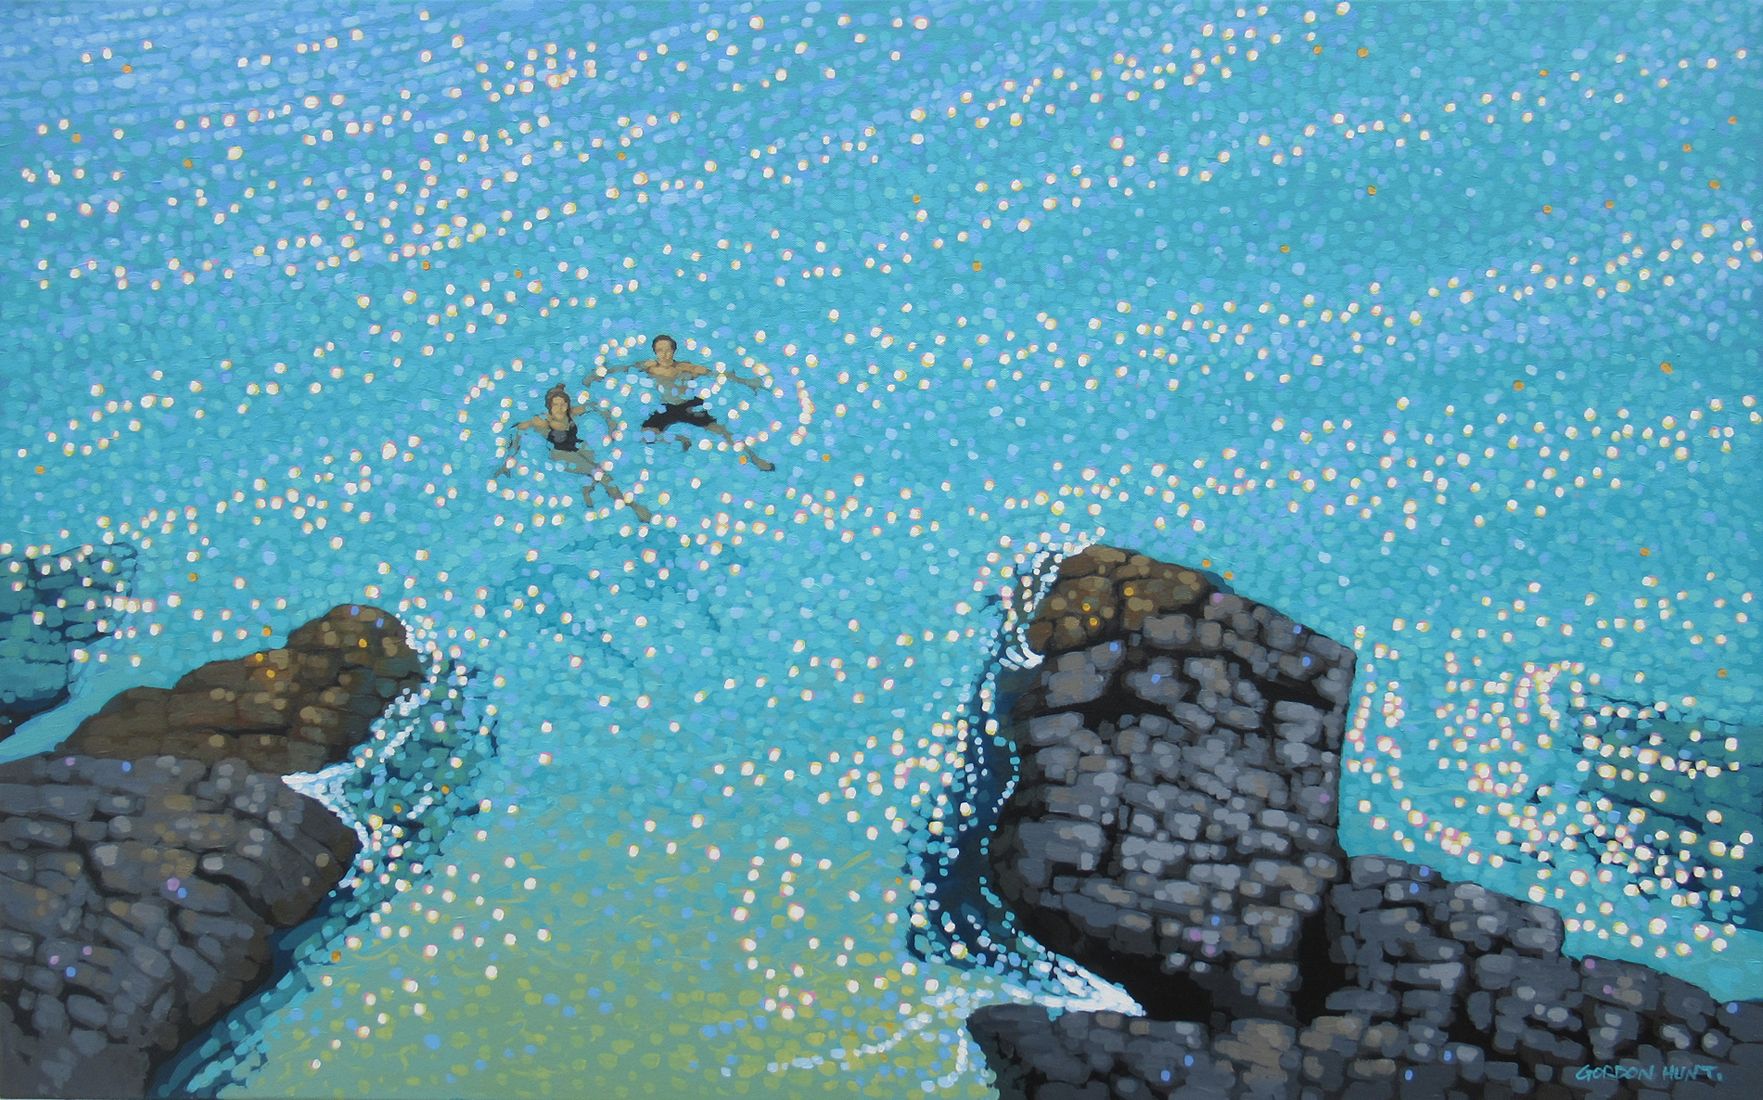 Turquoise water and sparkles - come on in, the waters lovely. St. Ives, Cornwall by Gordon Hunt